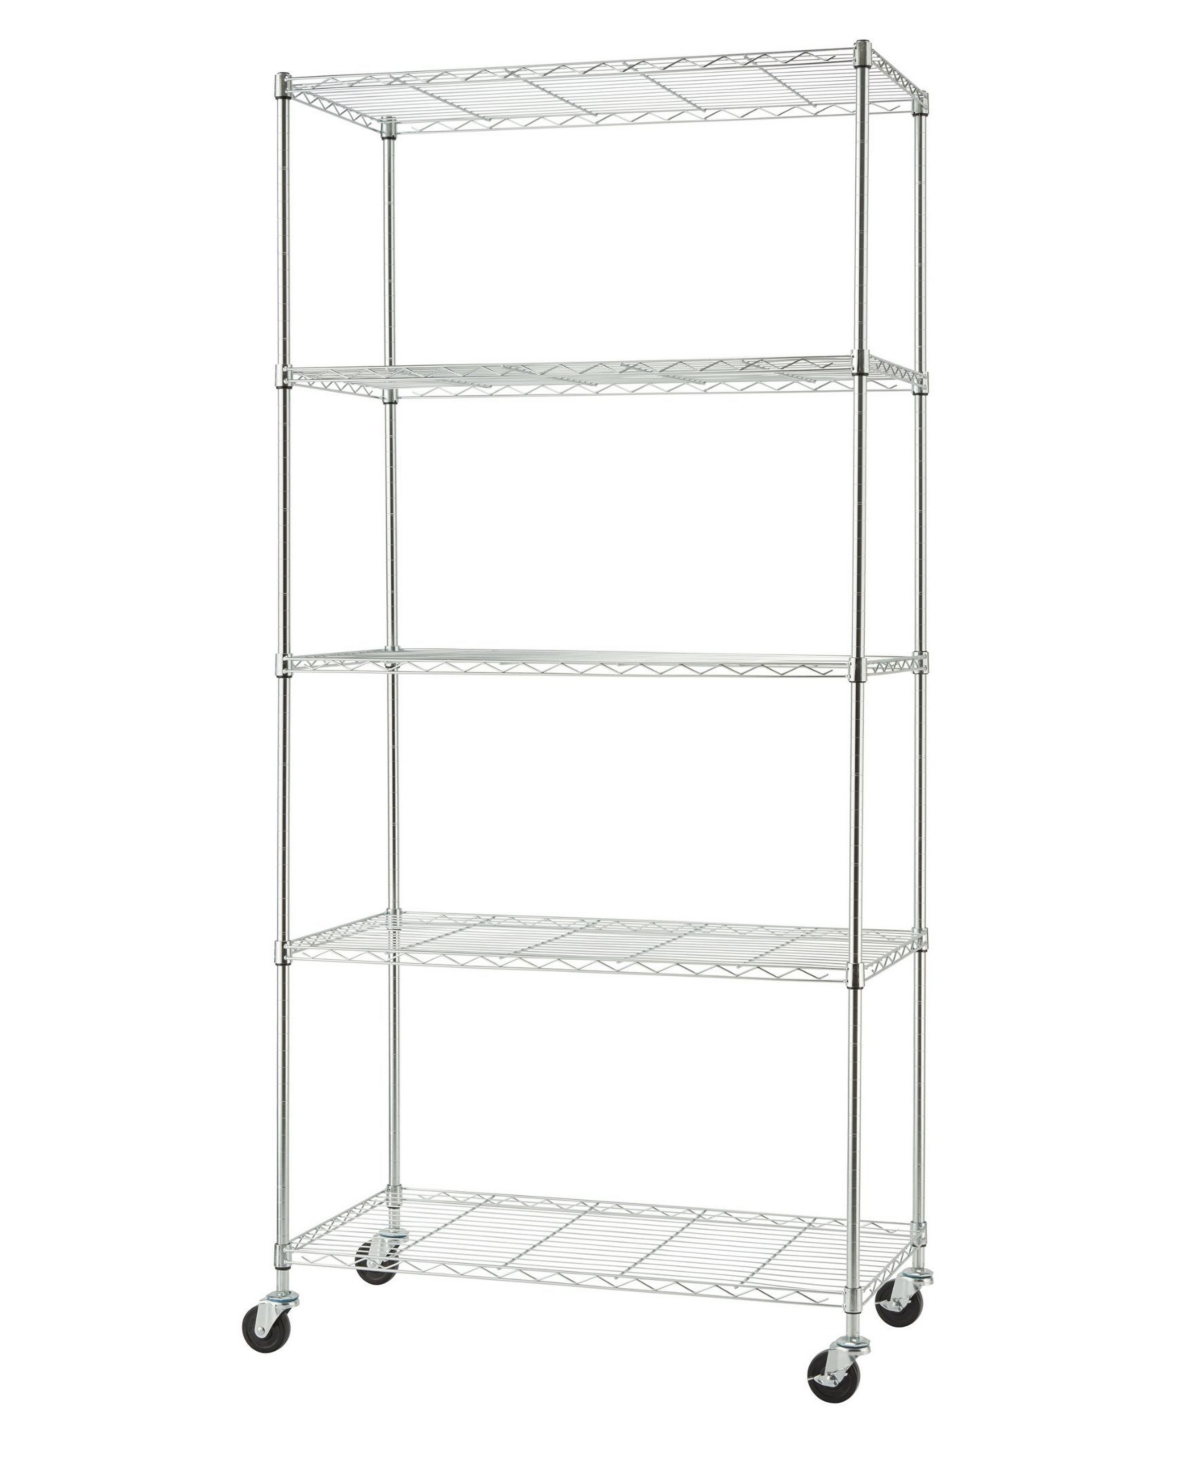 Basics 5-Tier Wire Shelving Rack Includes Wheels - Chrome